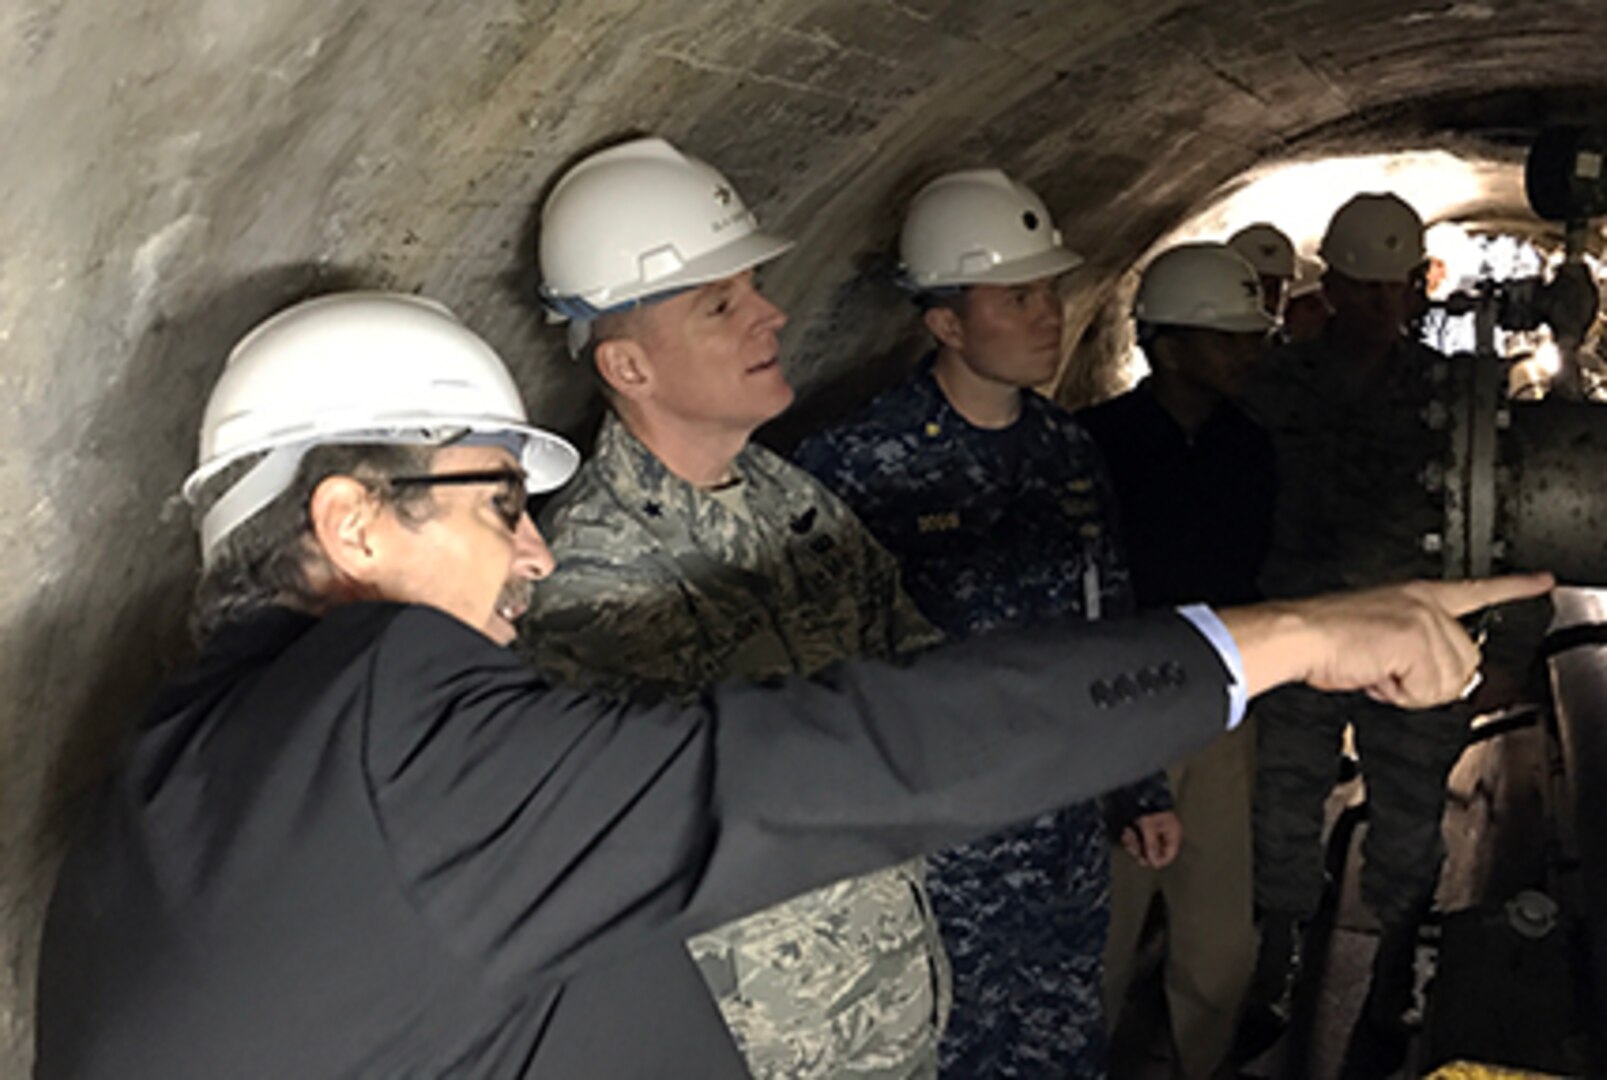 Kanto Plains Fuel Director Steve Shultz, left, explains the unique aspects of the challenging topography and infrastructure onboard Defense Fuel Support Point Hakozaki on the island of Azuma located within Tokyo Bay, Japan, to DLA Energy Commander Air Force Brig. Gen. Martin Chapin, second from left, and other leaders. The underground tunnel at DFSP Hakozaki provides access to valves and piping for a tank originally constructed in 1927.